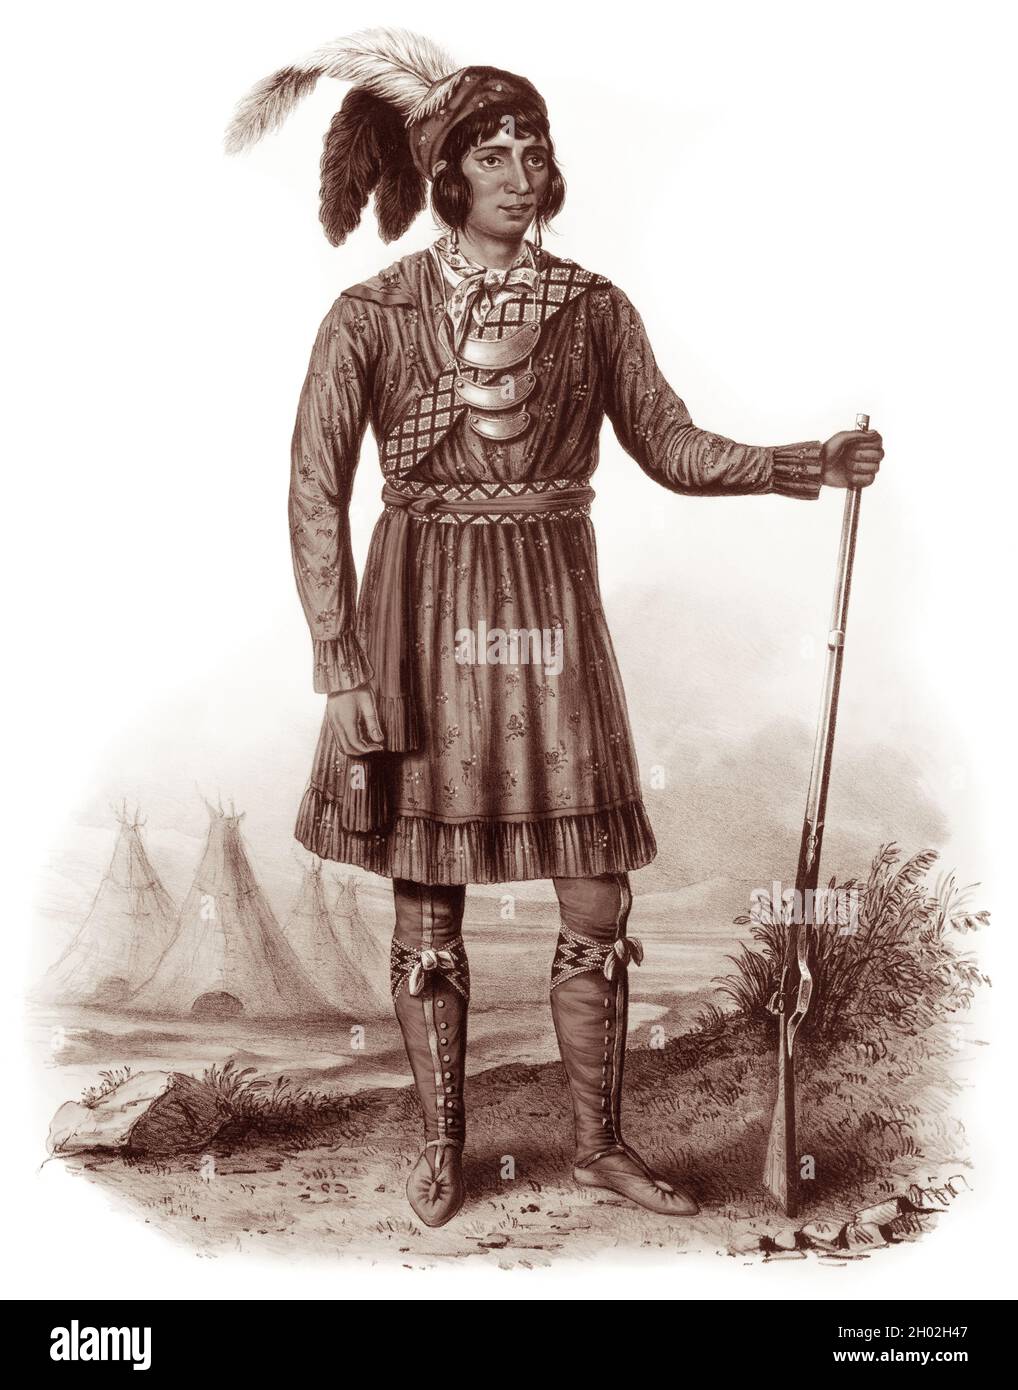 Chief Osceola (1804-1838), the most well-known leader of the Seminole Indians, led a small group of warriors in the Seminole resistance during the Second Seminole War, when the United States tried to remove the tribe from their lands in Florida to Indian Territory west of the Mississippi River. Stock Photo